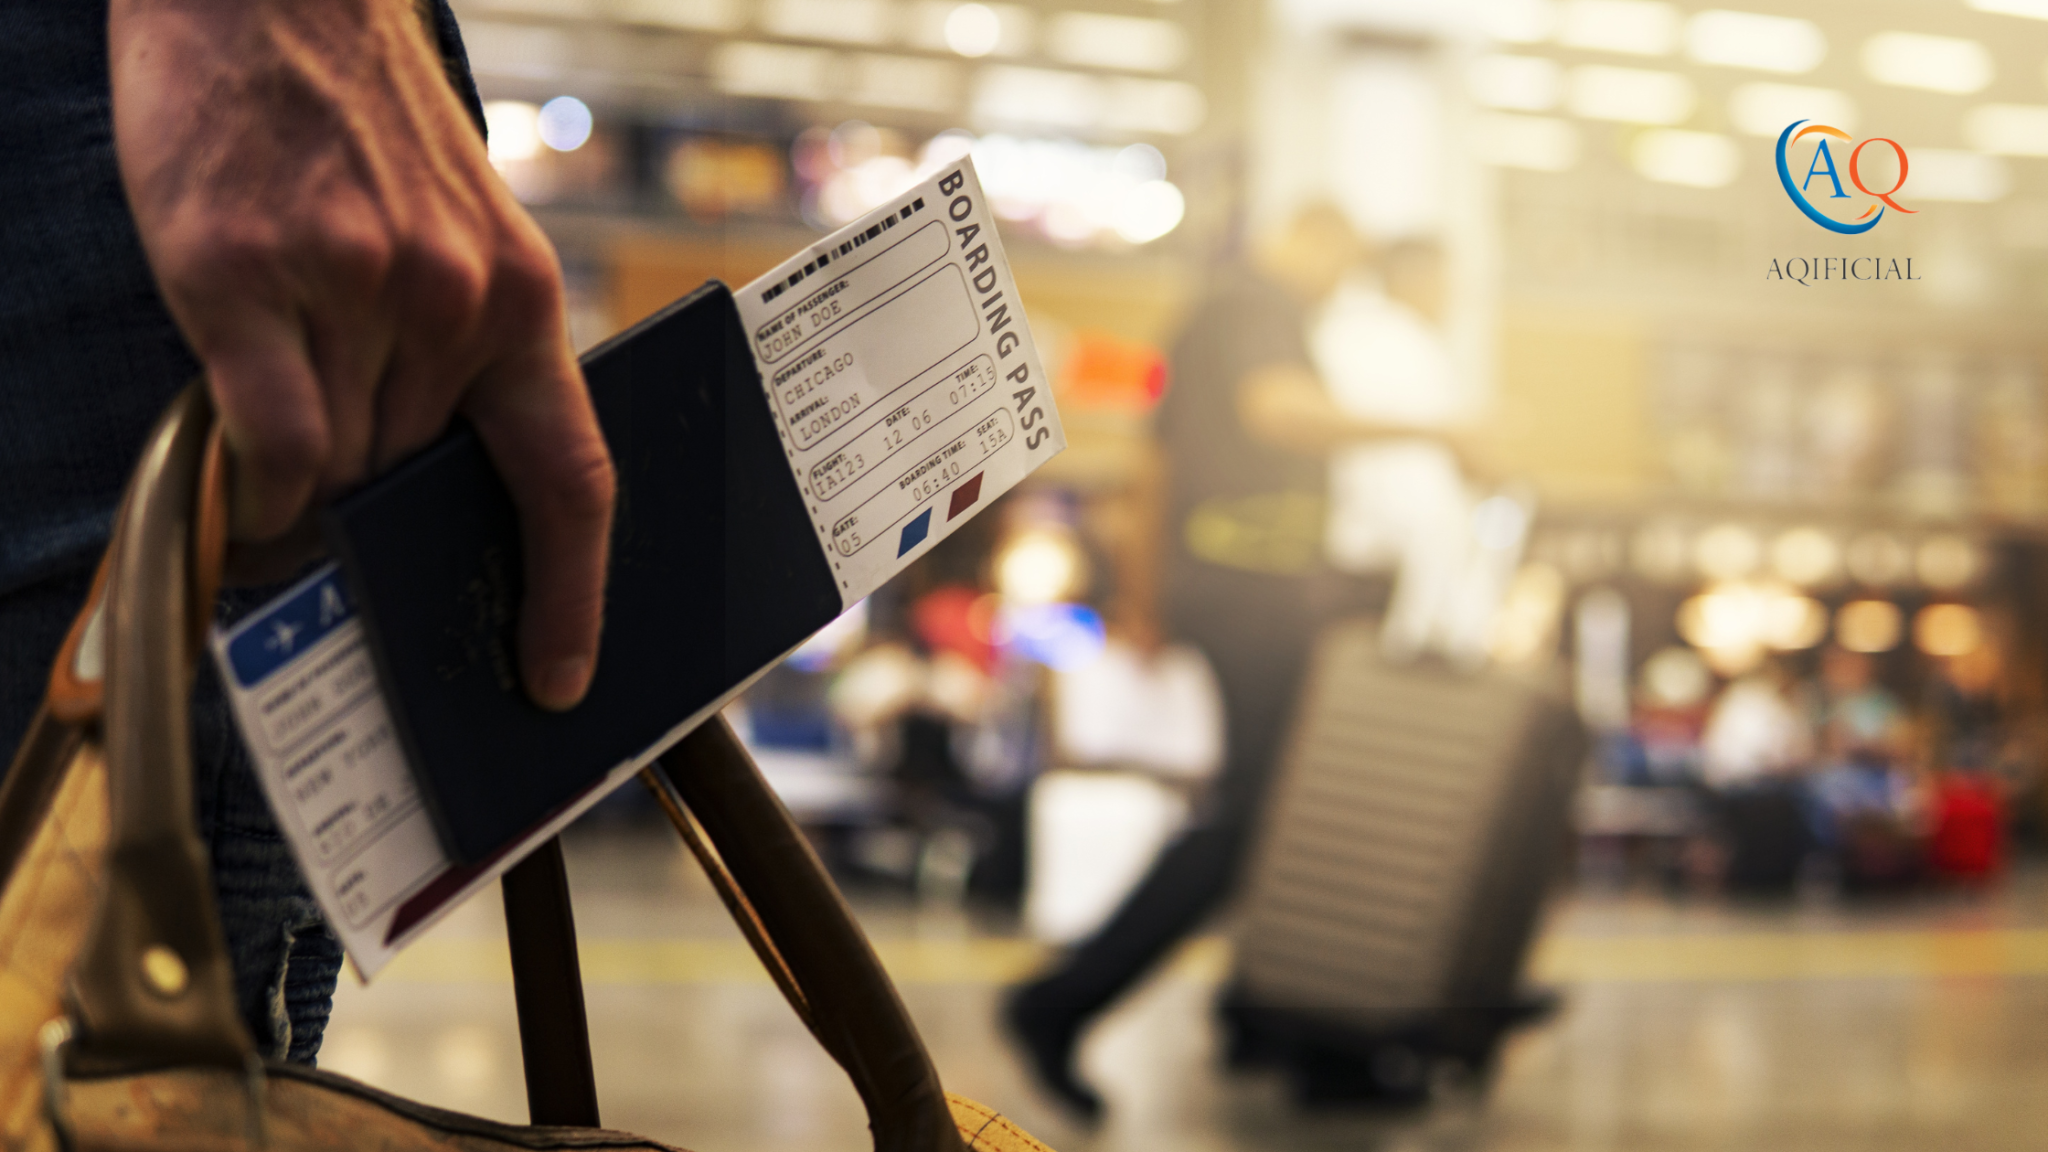 Close-up of a person's hand holding a boarding pass and a passport at an airport with blurry travelers and a luggage trolley in the background, alongside a logo that reads 'AQ Official'.